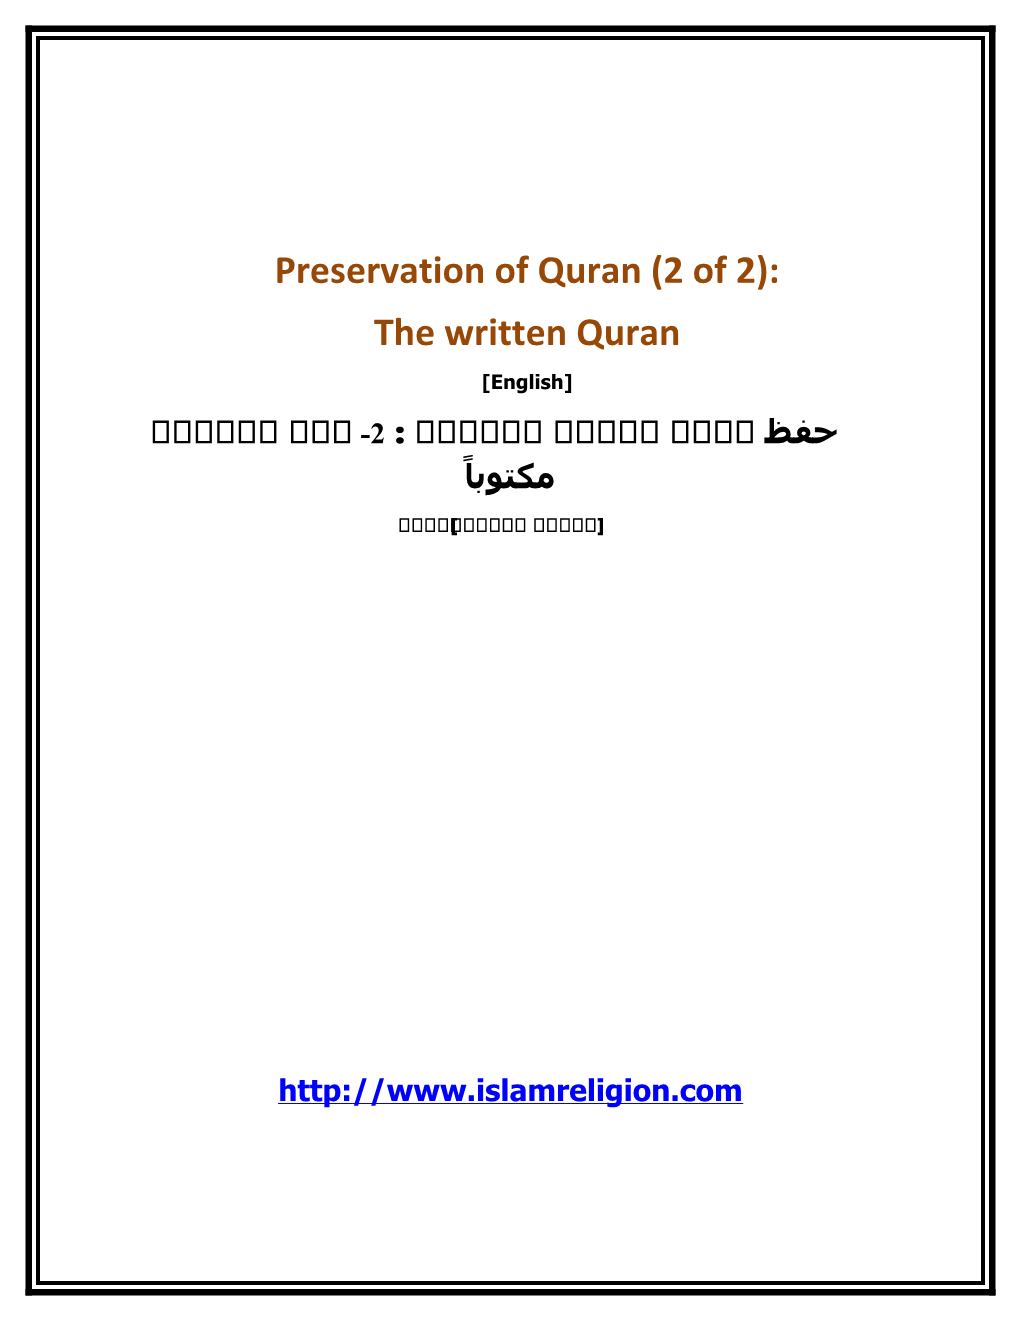 Preservation of Quran (Part 2 of 2): the Written Quran